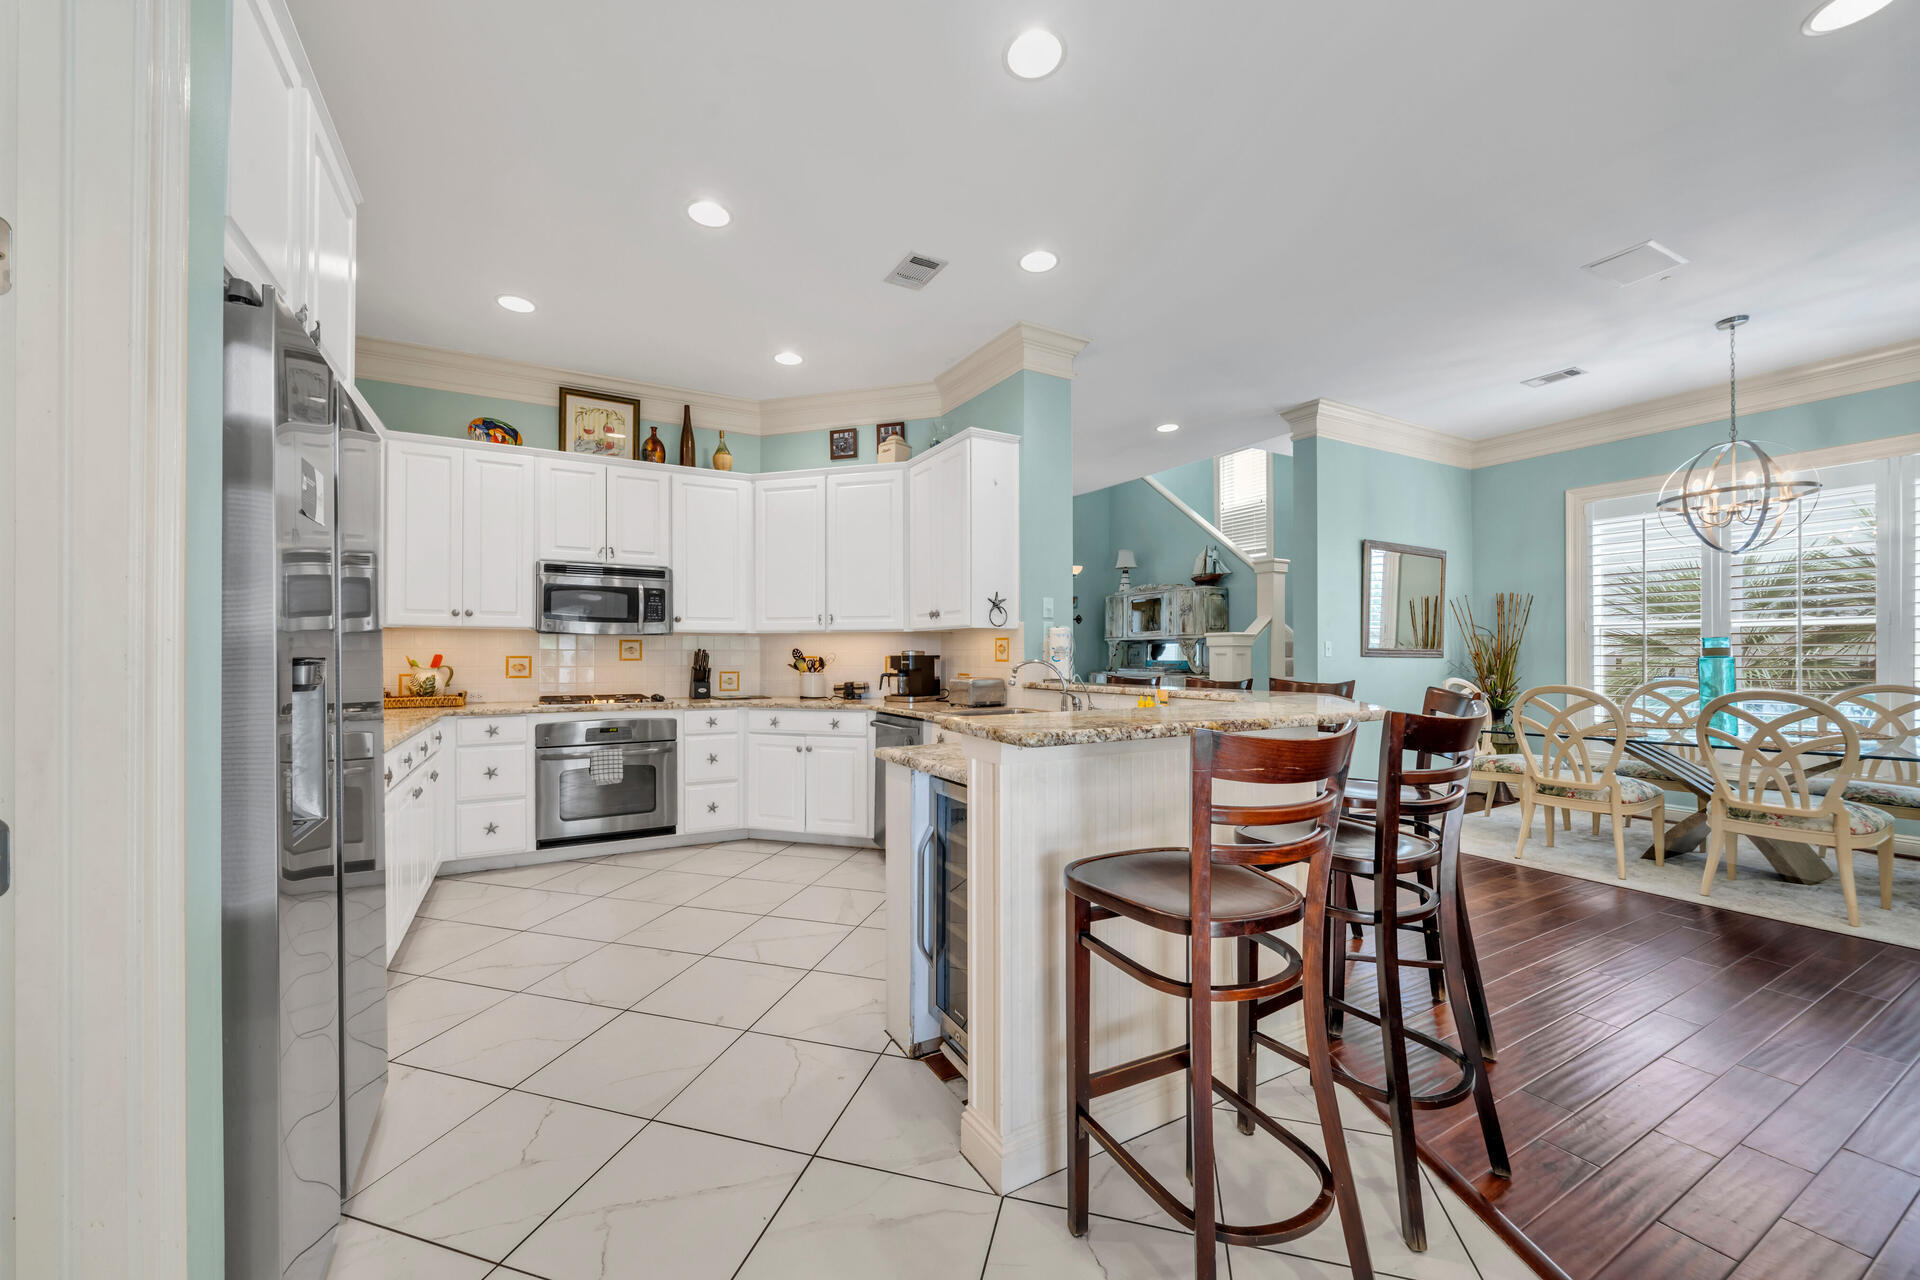 77 Cayman Cove, Destin, Florida, 32541, United States, 4 Bedrooms Bedrooms, ,4 BathroomsBathrooms,Residential,For Sale,77 Cayman Cove,1488411